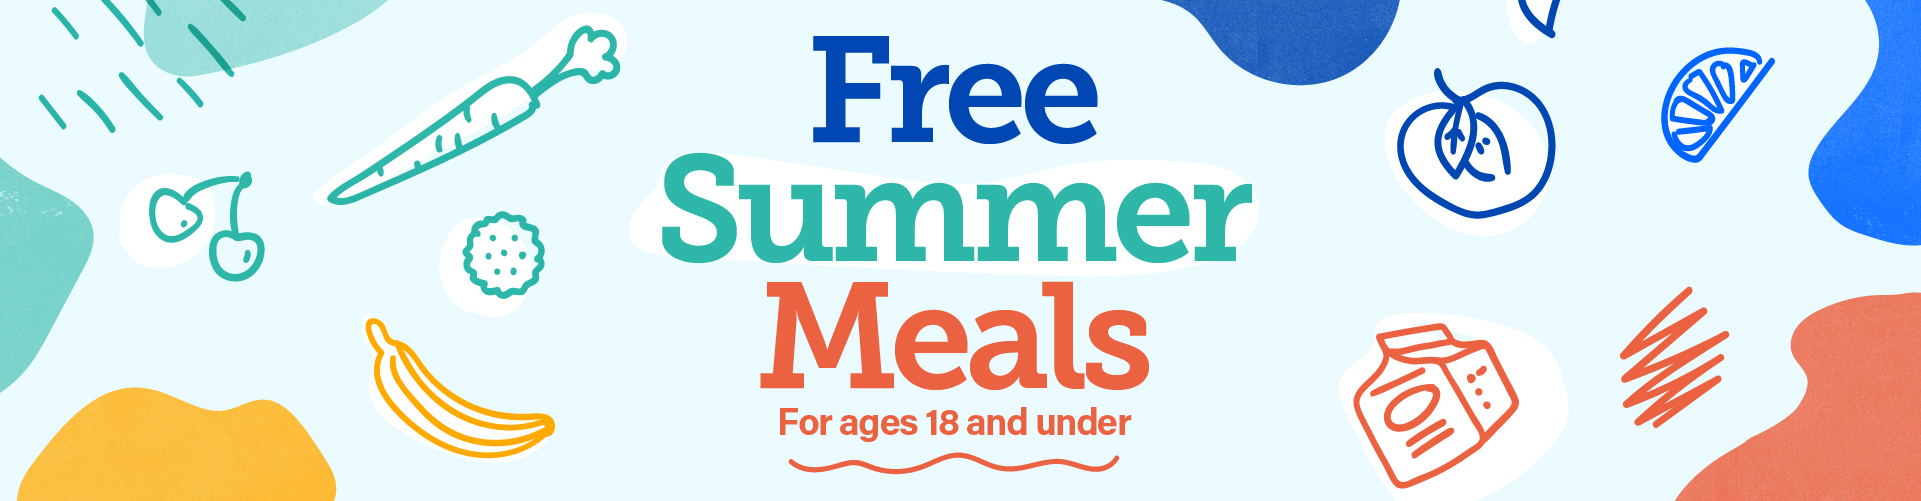 Free Summer Meals | United Way of King County